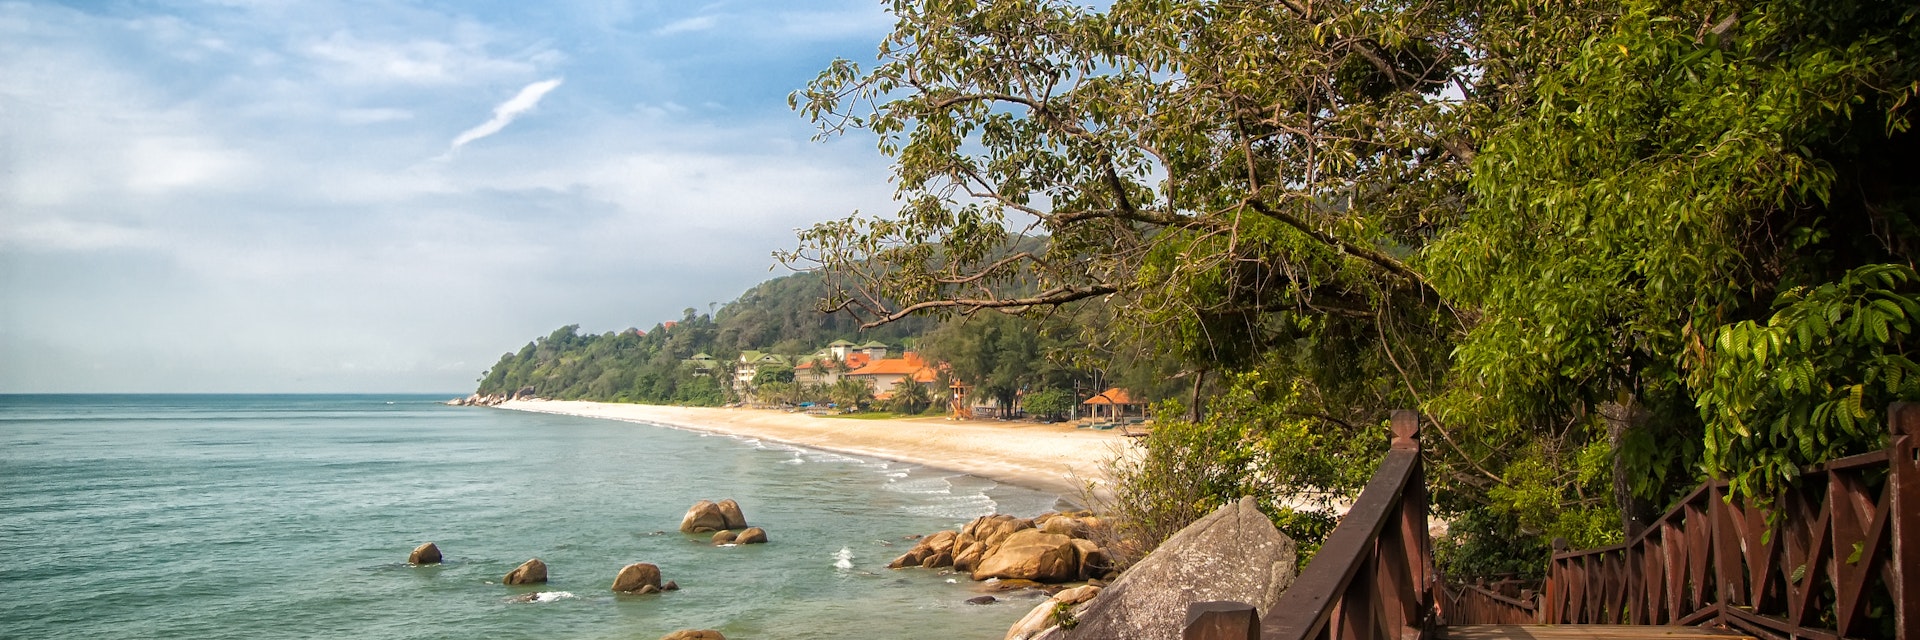 Stunning nature of Kuantan. Best Kuantan beach resorts famous for pristine nature. Coastline with tropic nature plants sand beaches. Bridge or wooden pier at sea lagoon with rocks and waves.